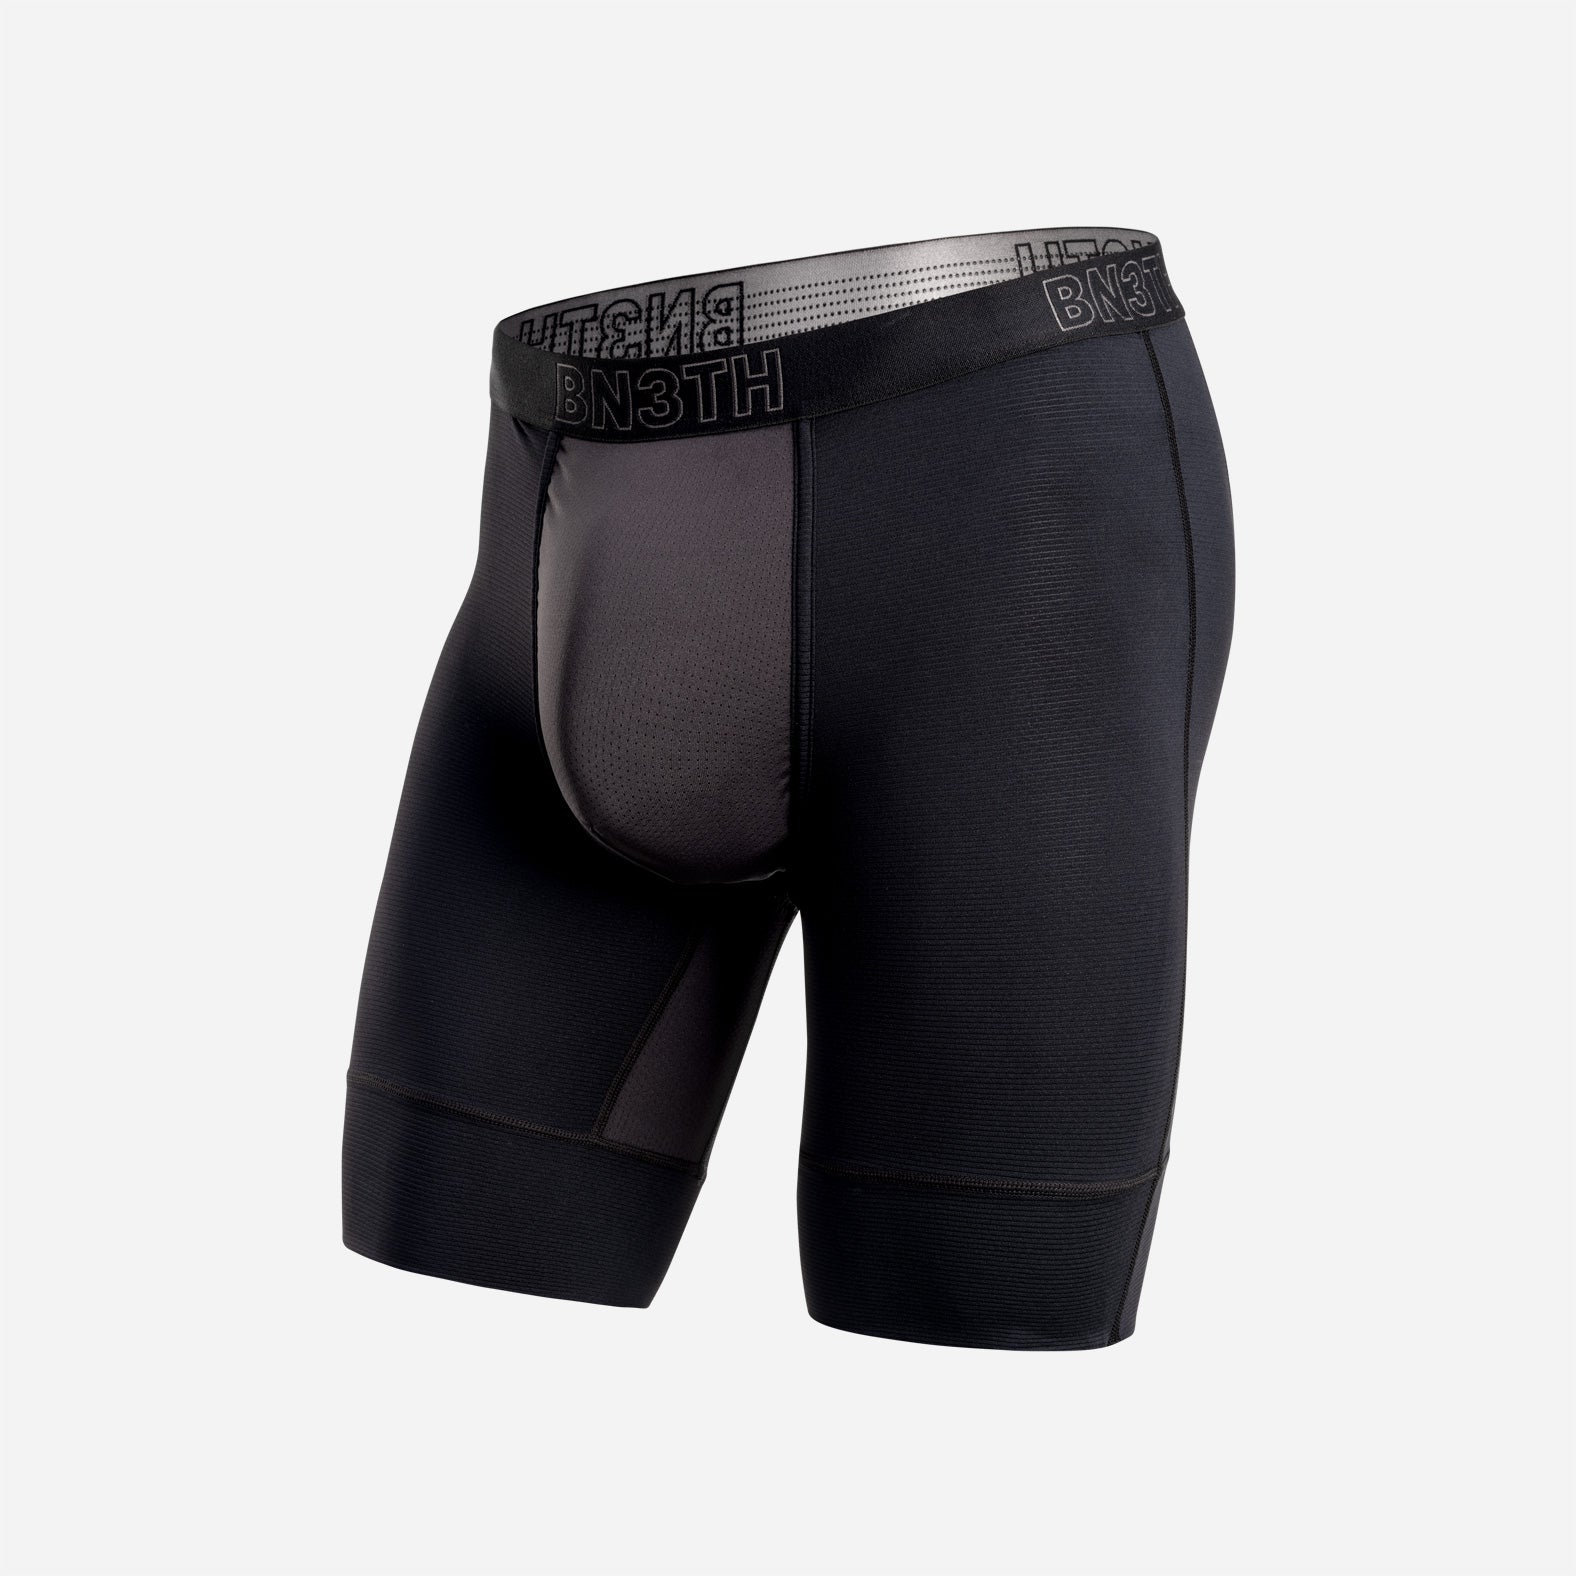 Padded Underwear Guide - Front + Rear Padding Help